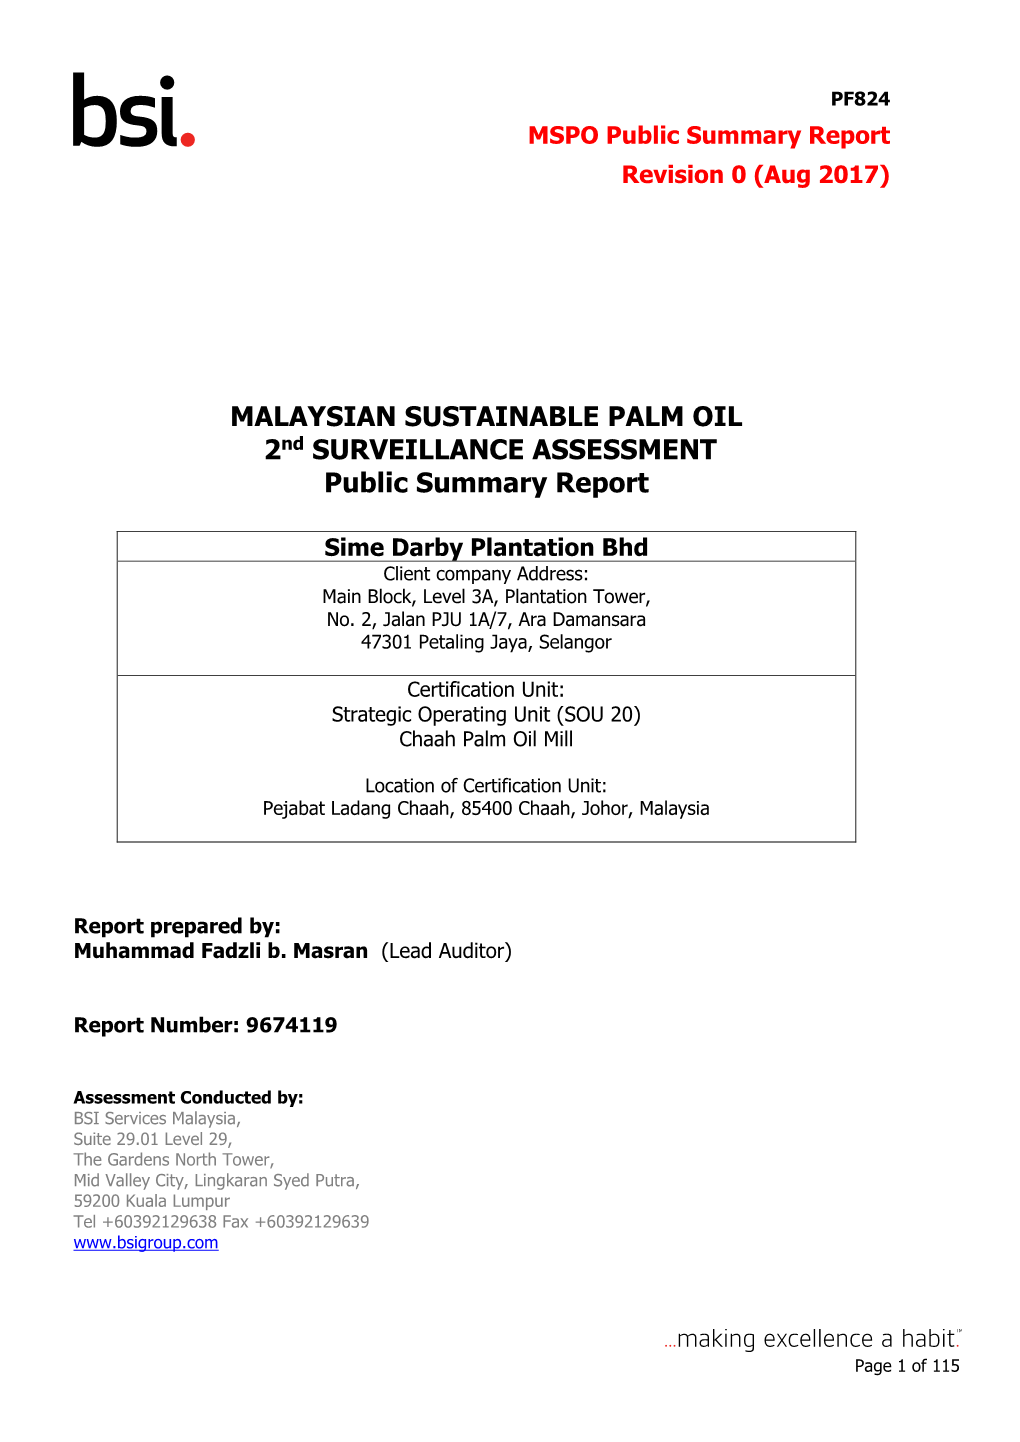 MALAYSIAN SUSTAINABLE PALM OIL 2Nd SURVEILLANCE ASSESSMENT Public Summary Report